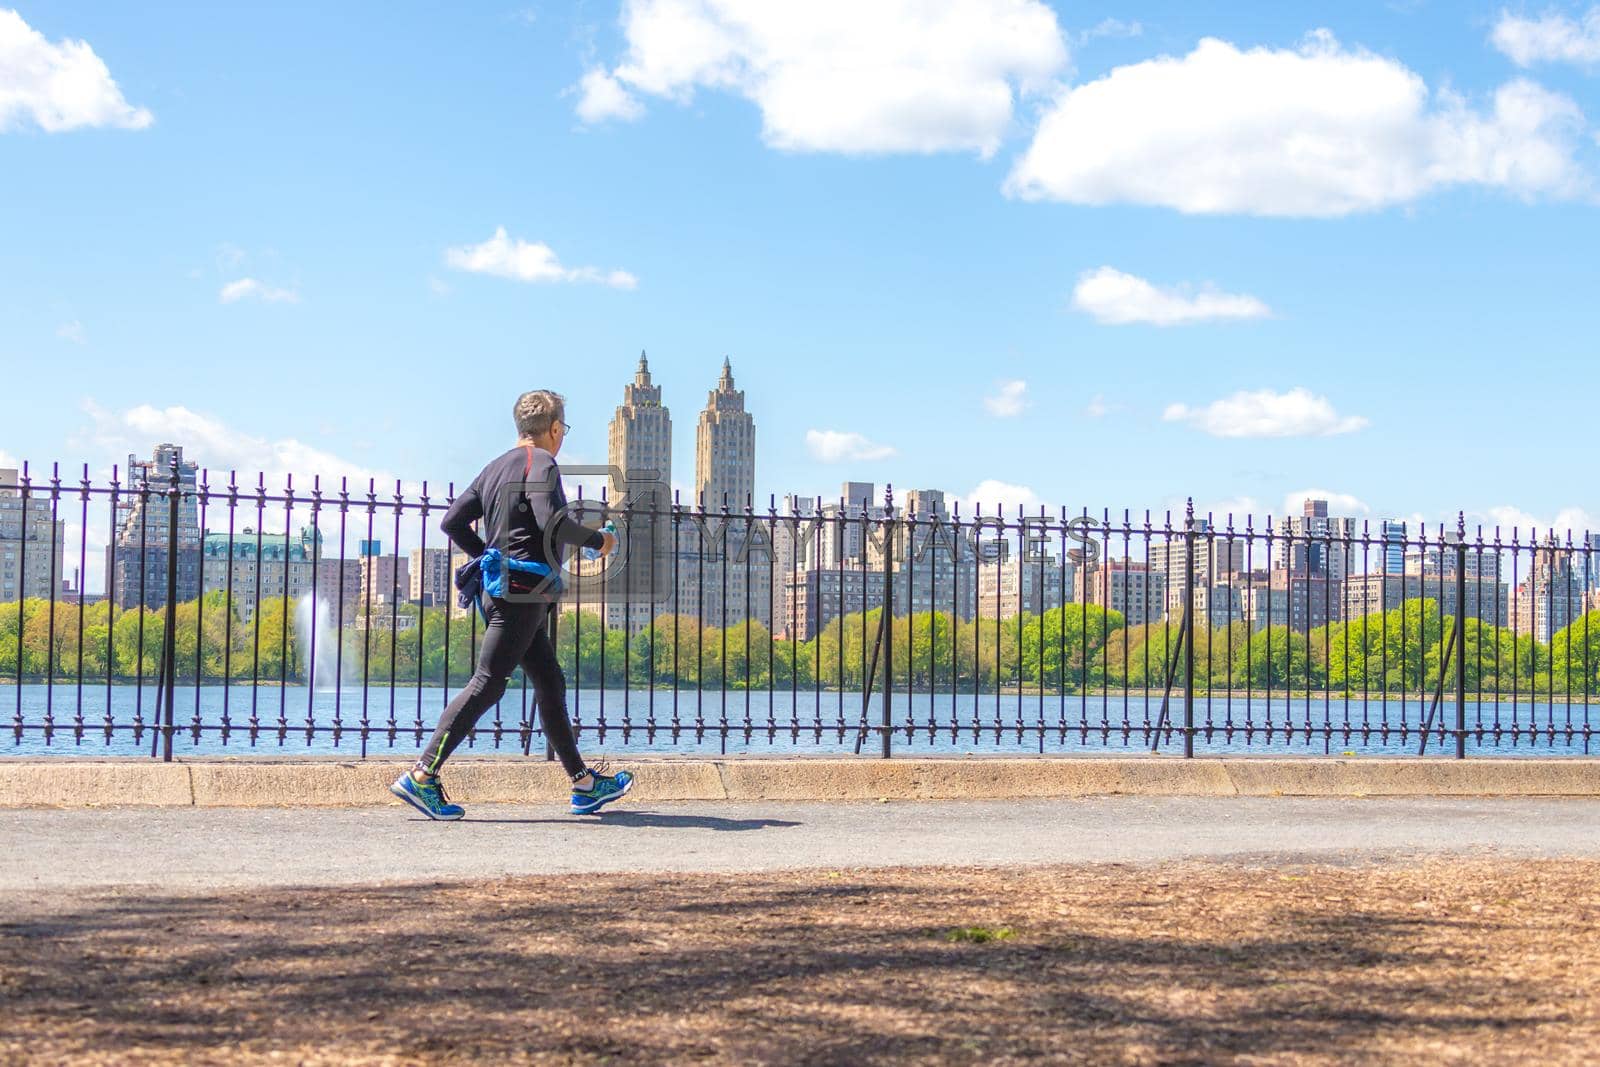 NEW YORK, USA - 15 MAY, 2019: Jogger running along Central Park reservoir in New York. Central Park is full of active people throughout the year